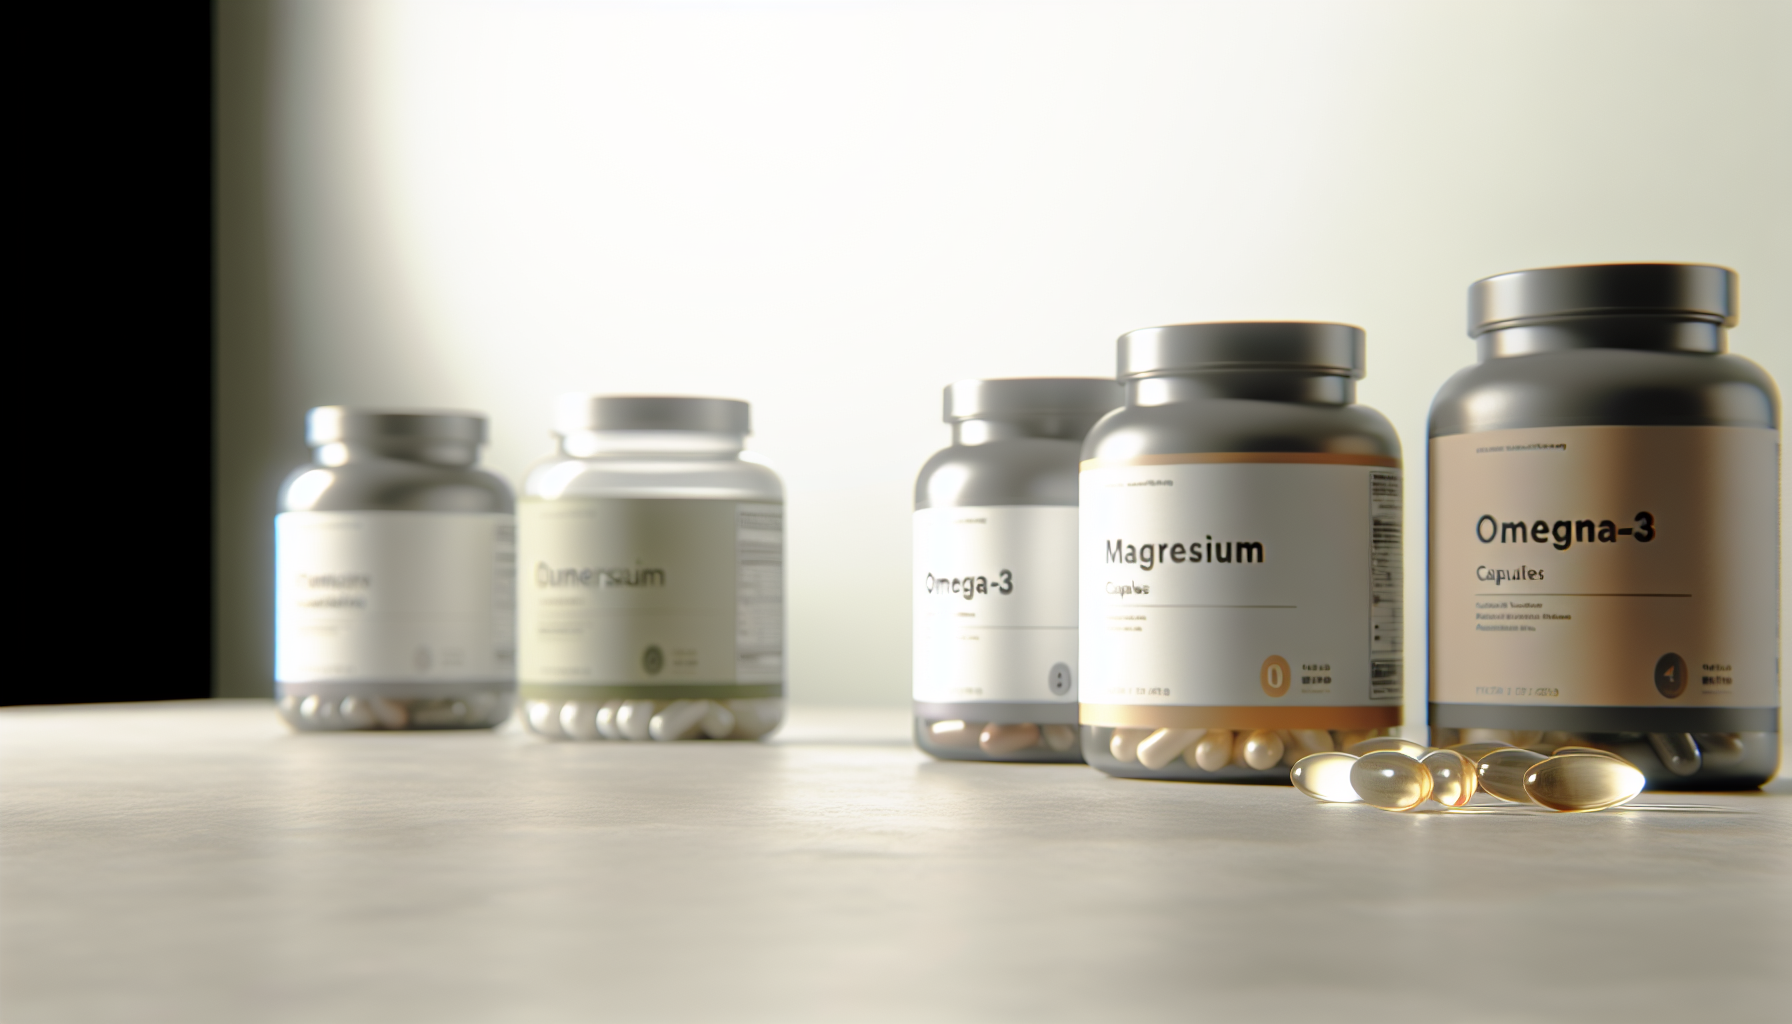 Photo of magnesium and omega-3 supplements